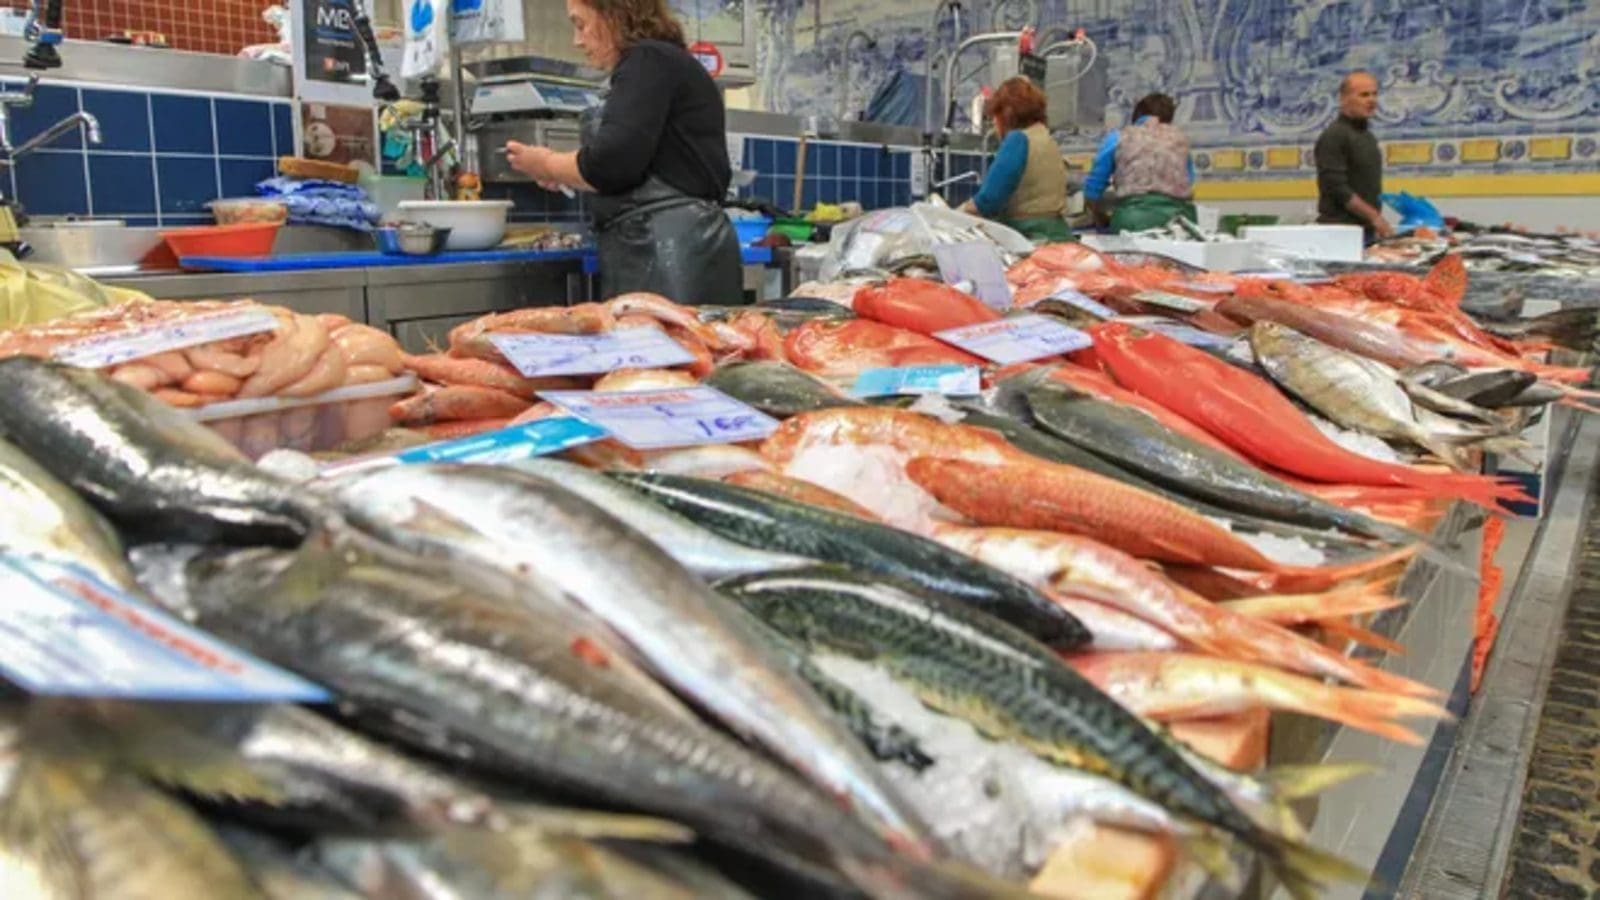 FDA updates guidance on eating of fish, encourages consumption among children, pregnant women